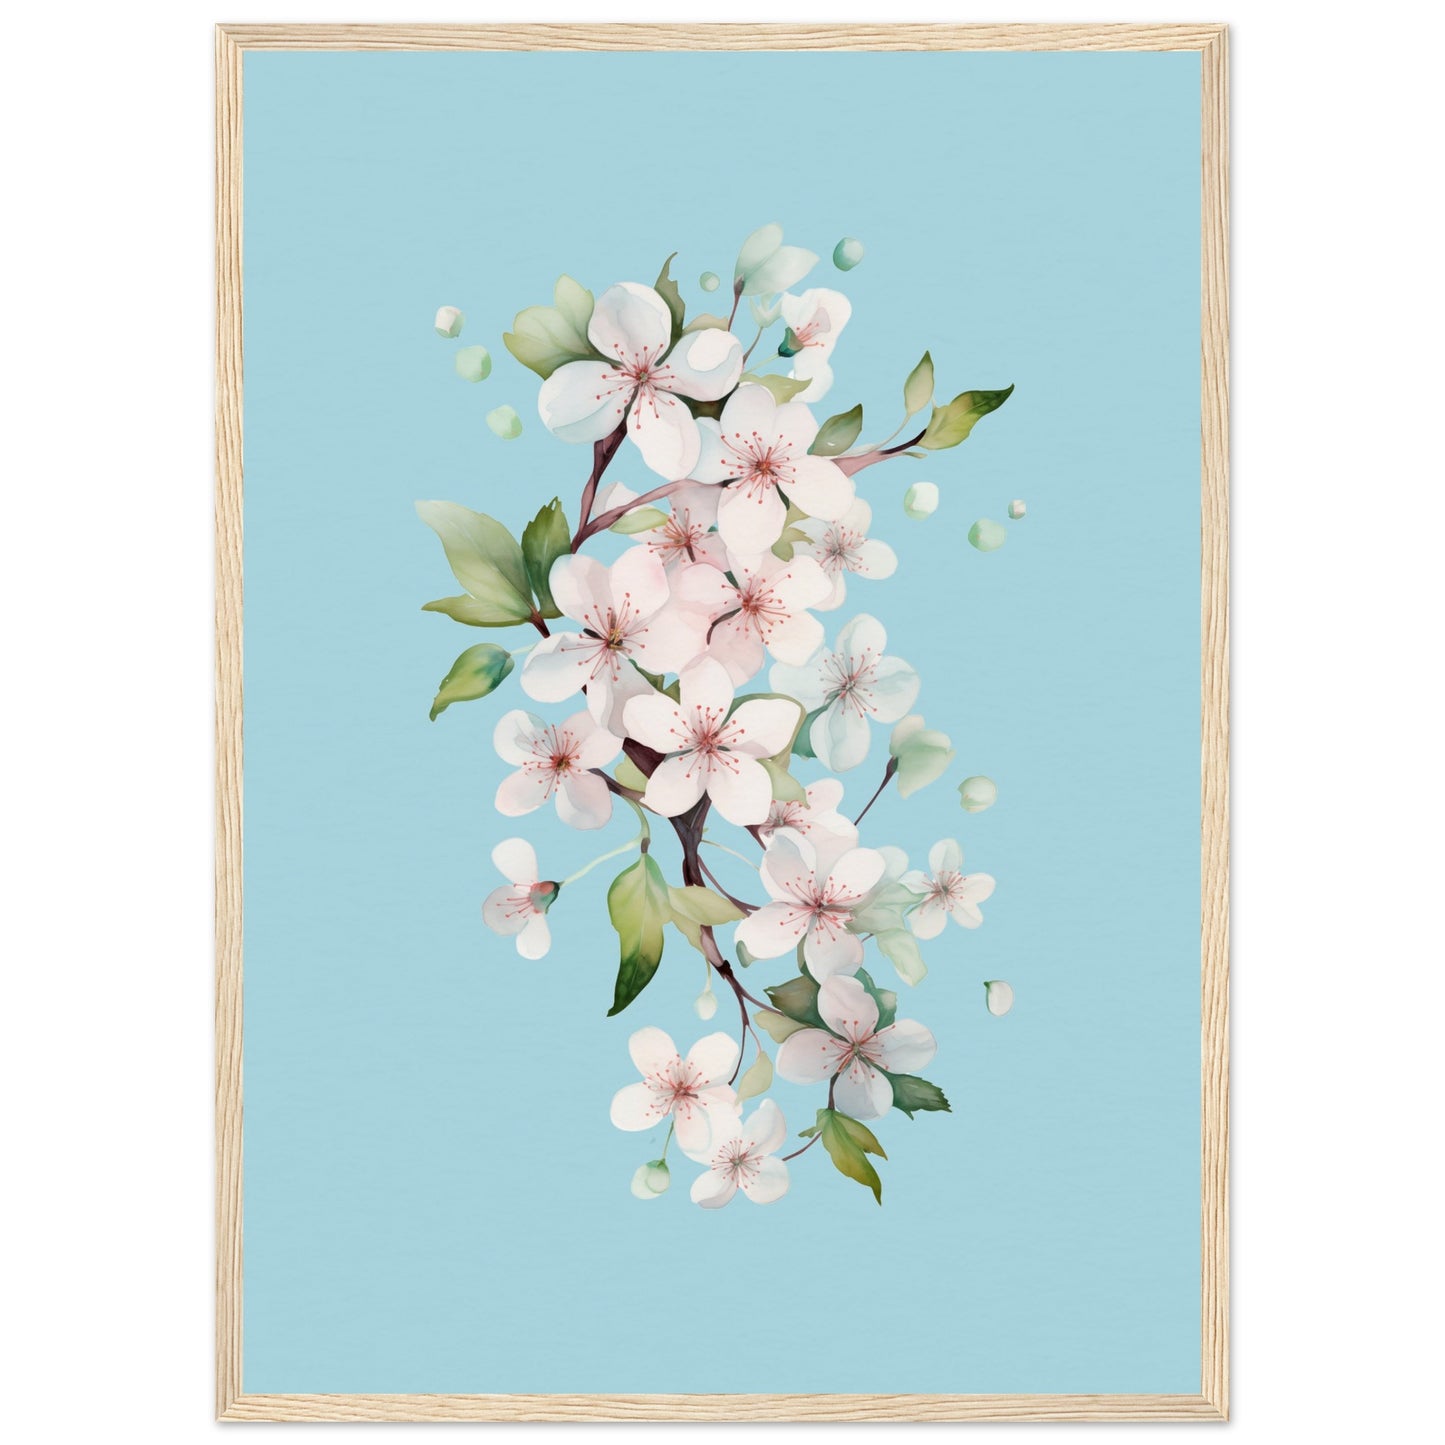 CHERRY BLOSSOMS No. 1 in BLUE BACKGROUND - in Museum-Quality Matte Paper Wooden Framed Poster